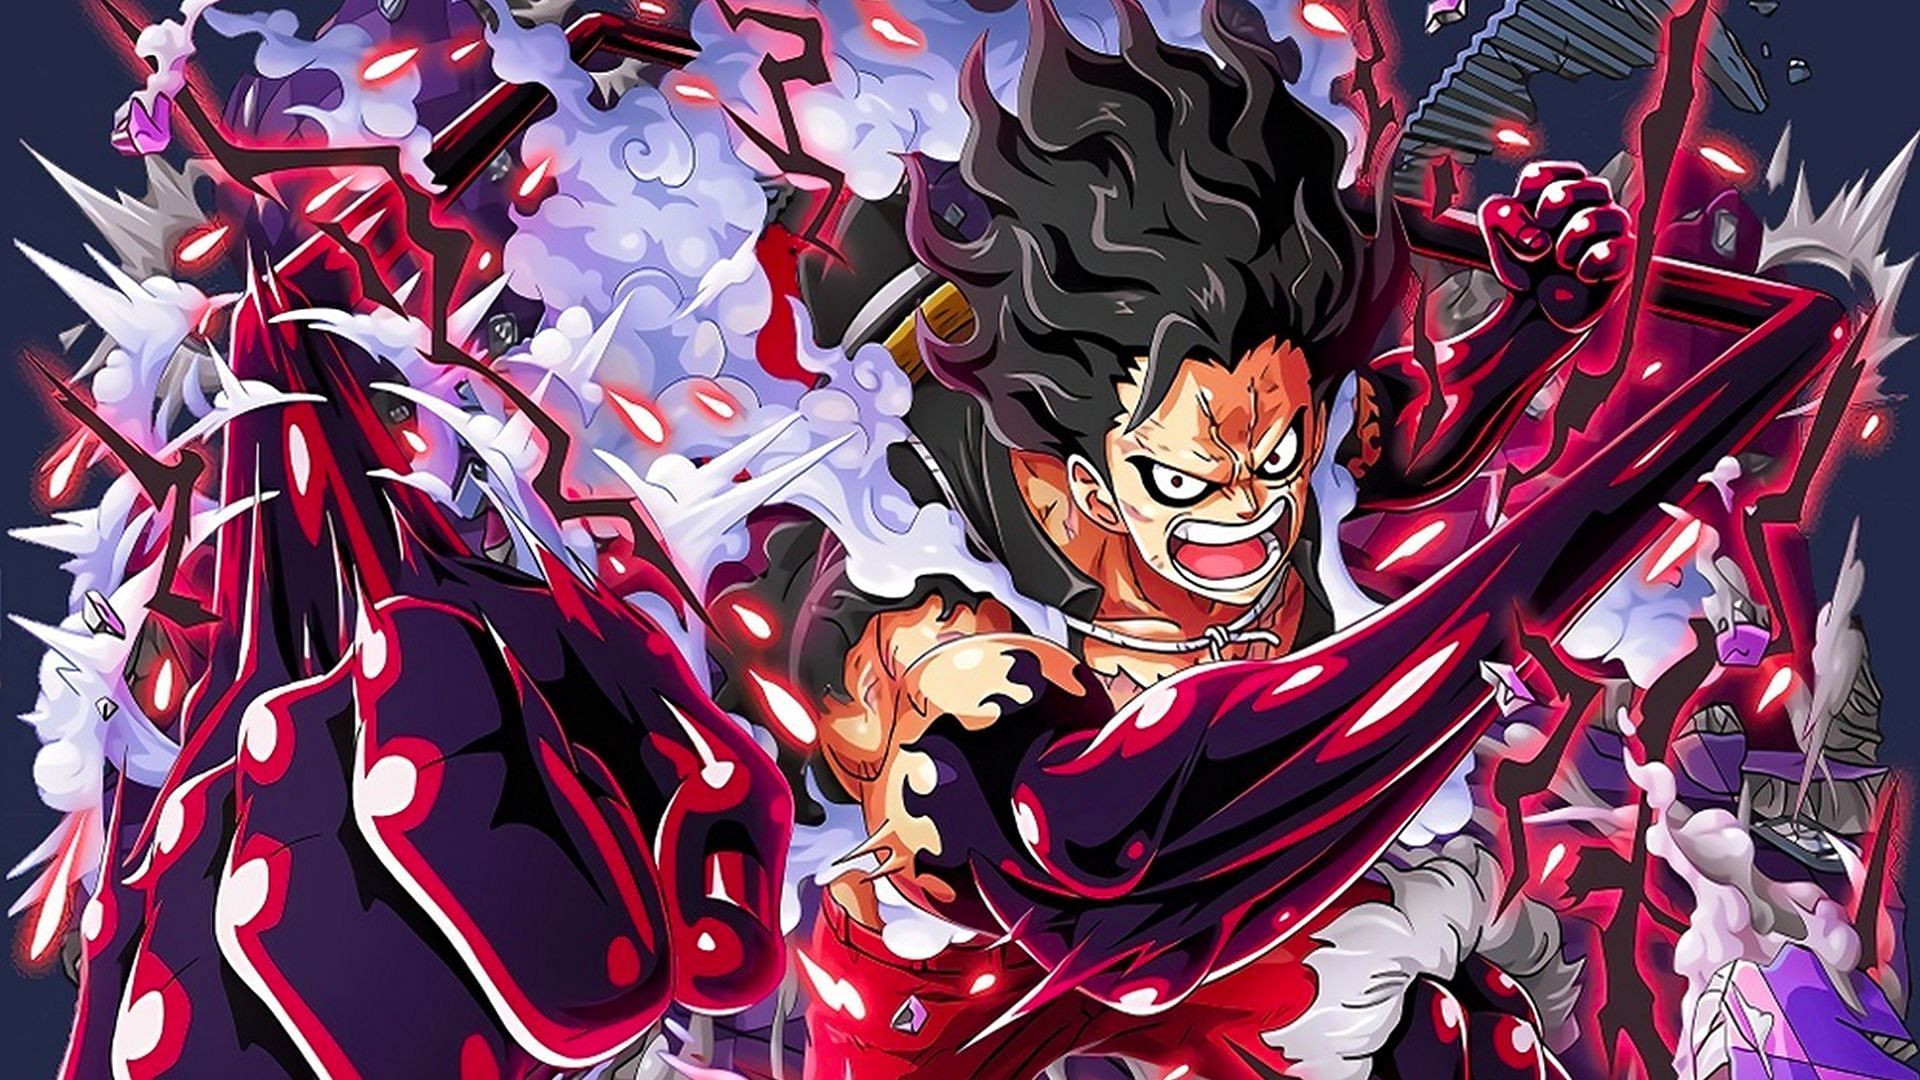 Video wallpaper Luffy Gear 5 with holding cybust lighting  One Piece  Anime